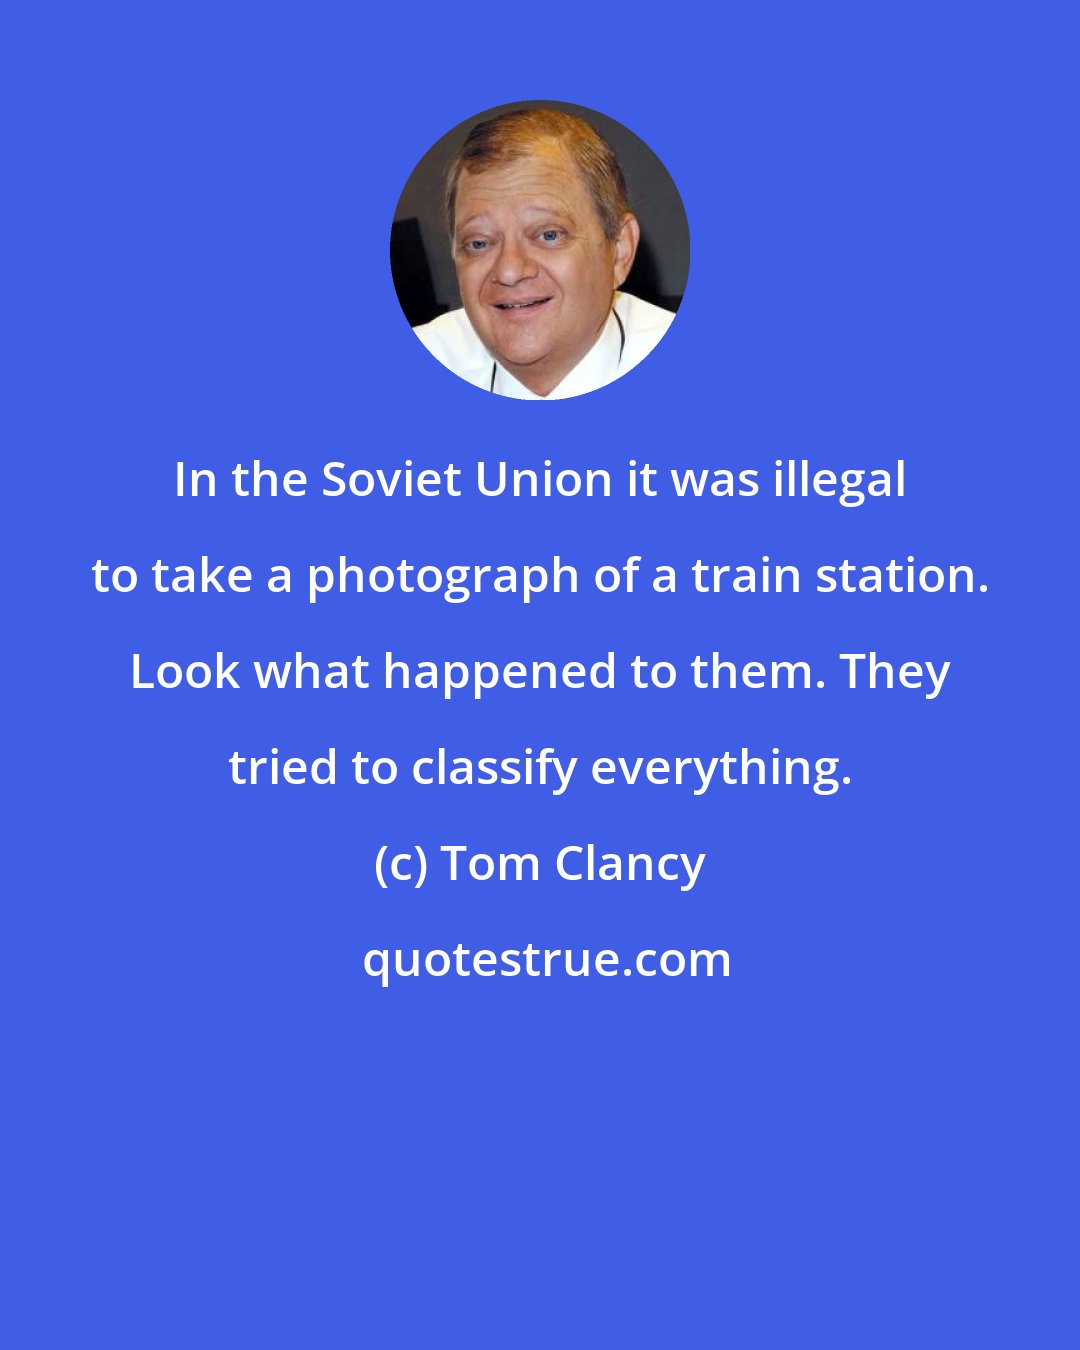 Tom Clancy: In the Soviet Union it was illegal to take a photograph of a train station. Look what happened to them. They tried to classify everything.